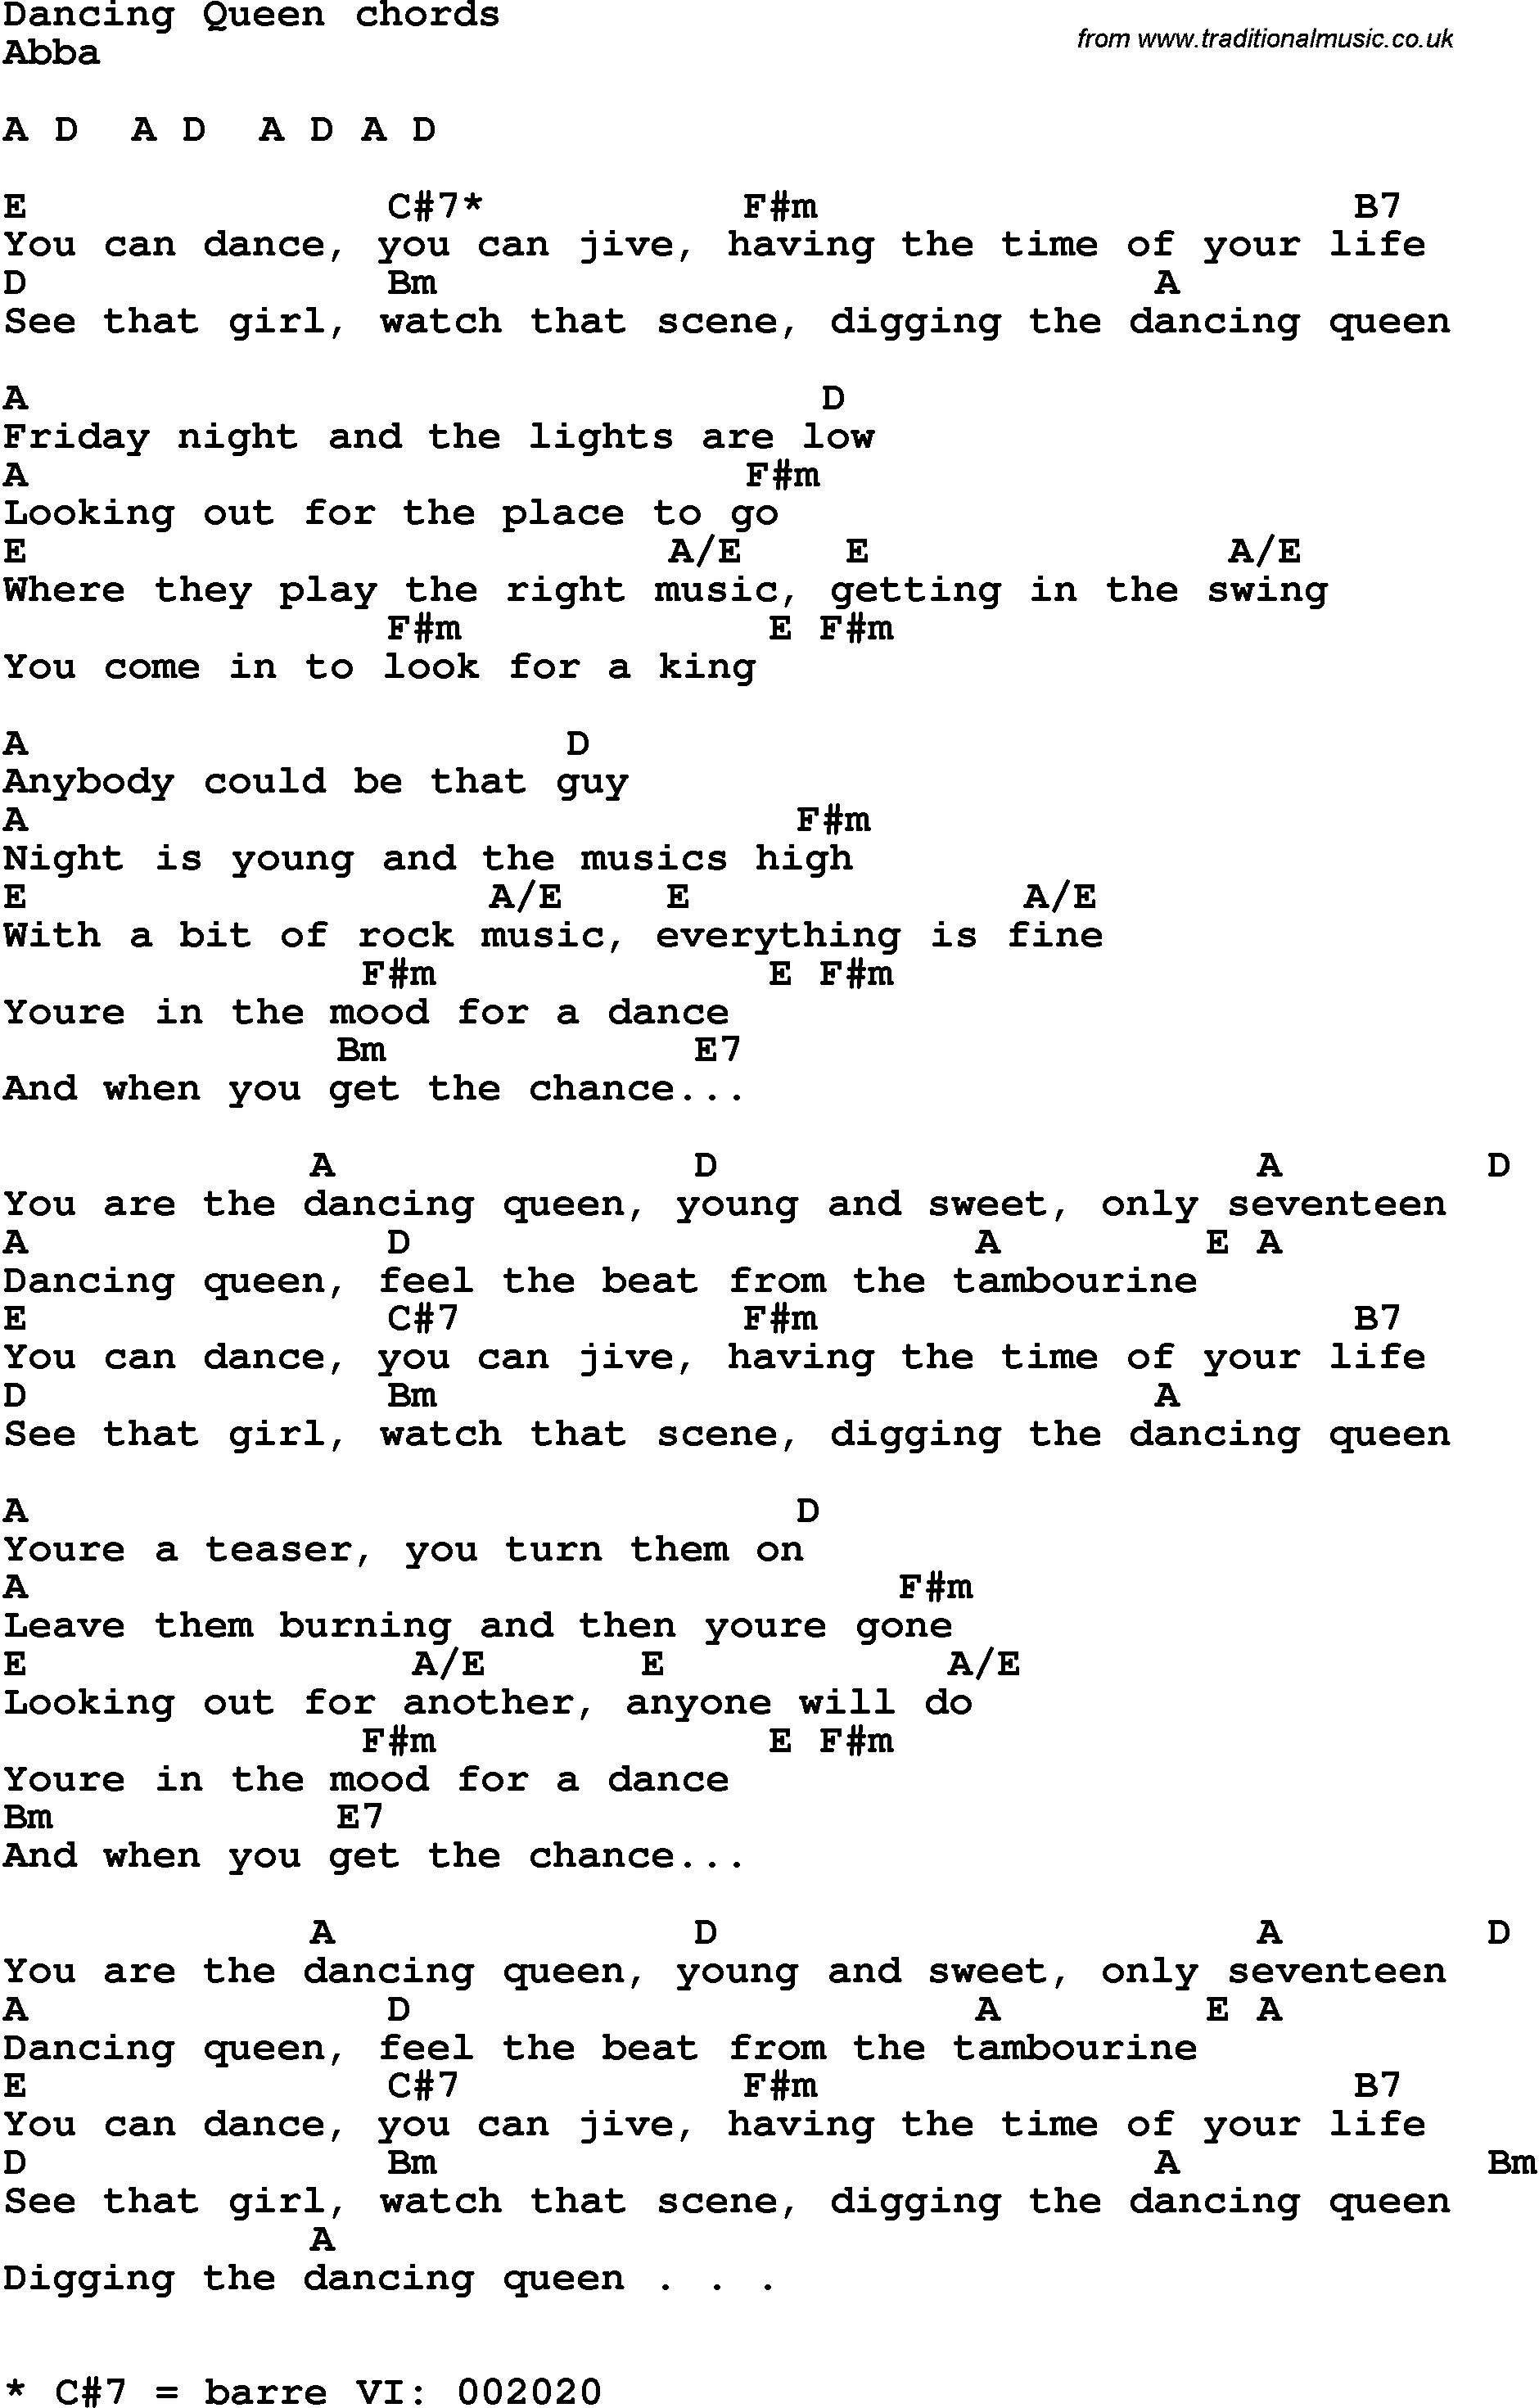 Song Lyrics with guitar chords for Dancing Queen